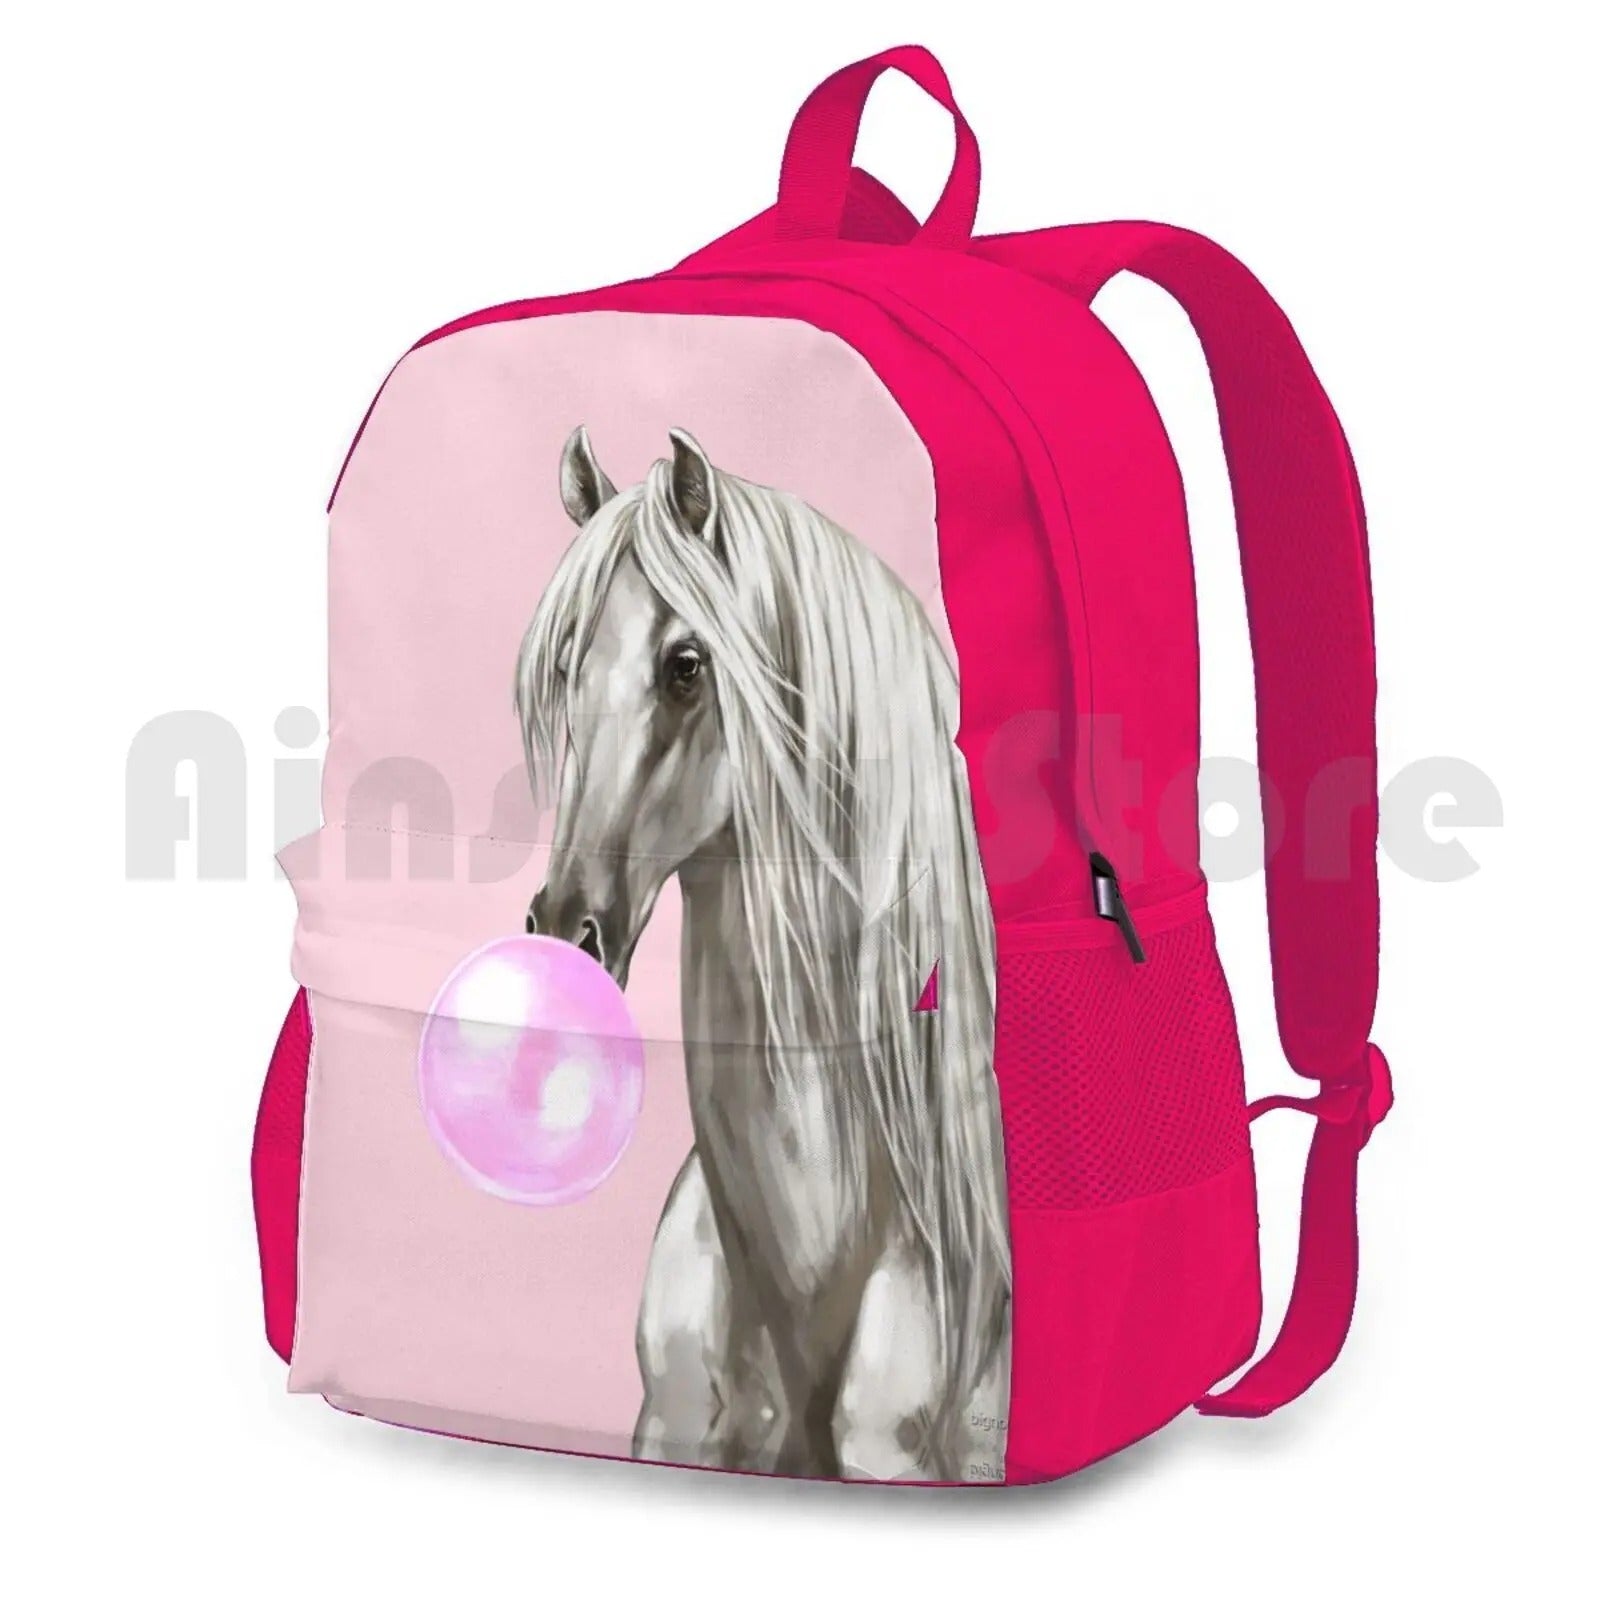 Backpack with Horse on It - Backpack - Pink